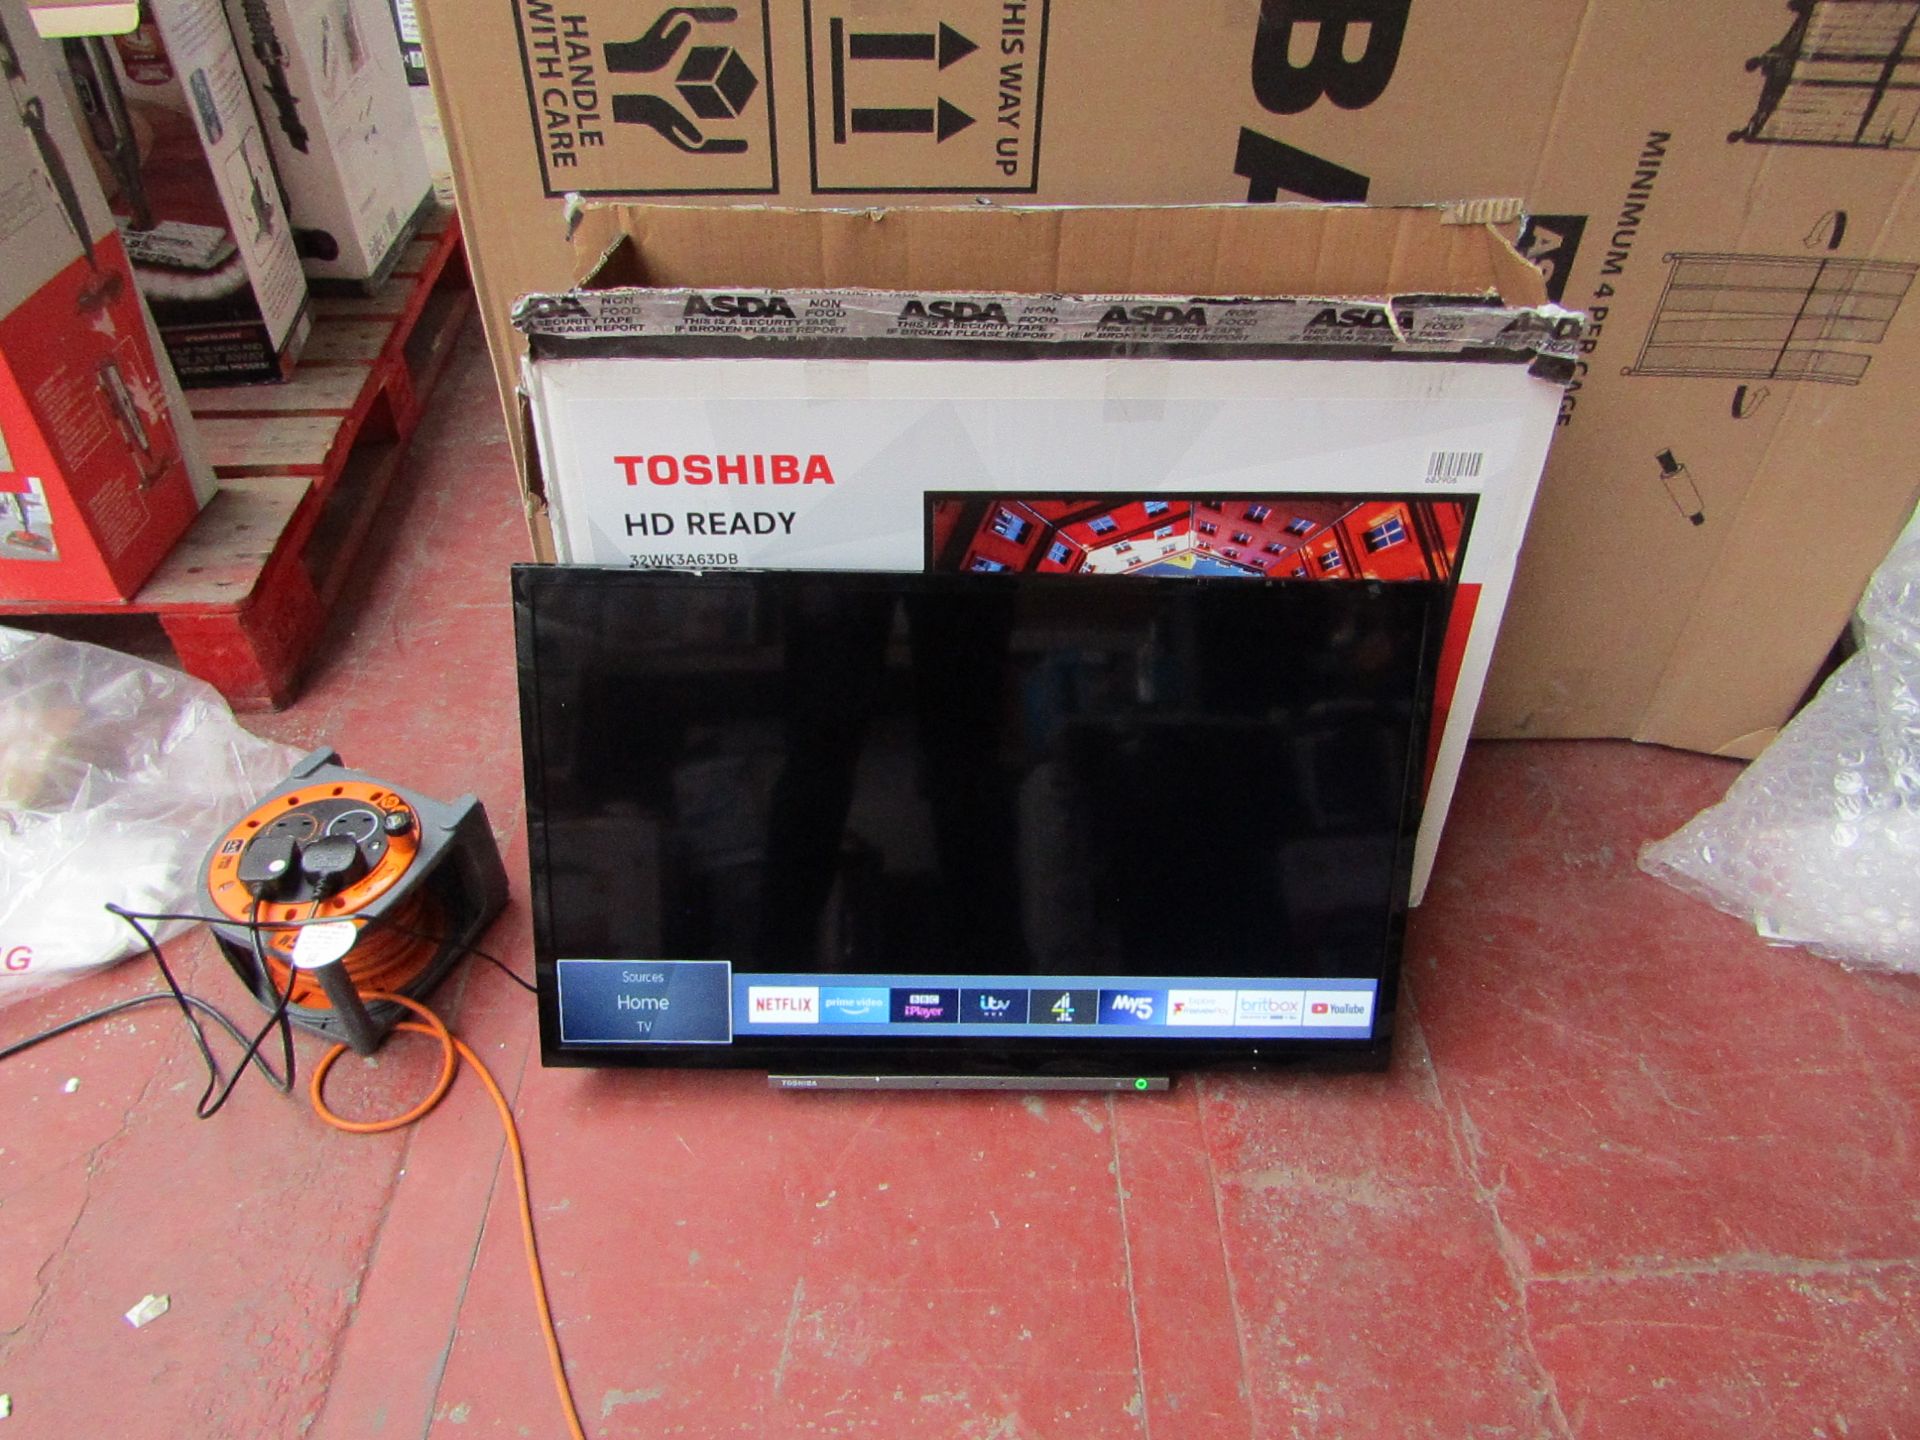 | 1x | TOSHIBA 32" HD READY TV / BUILT IN ALEXA | POWERS ON INCLUDES REMOTE CONTROL & STAND |